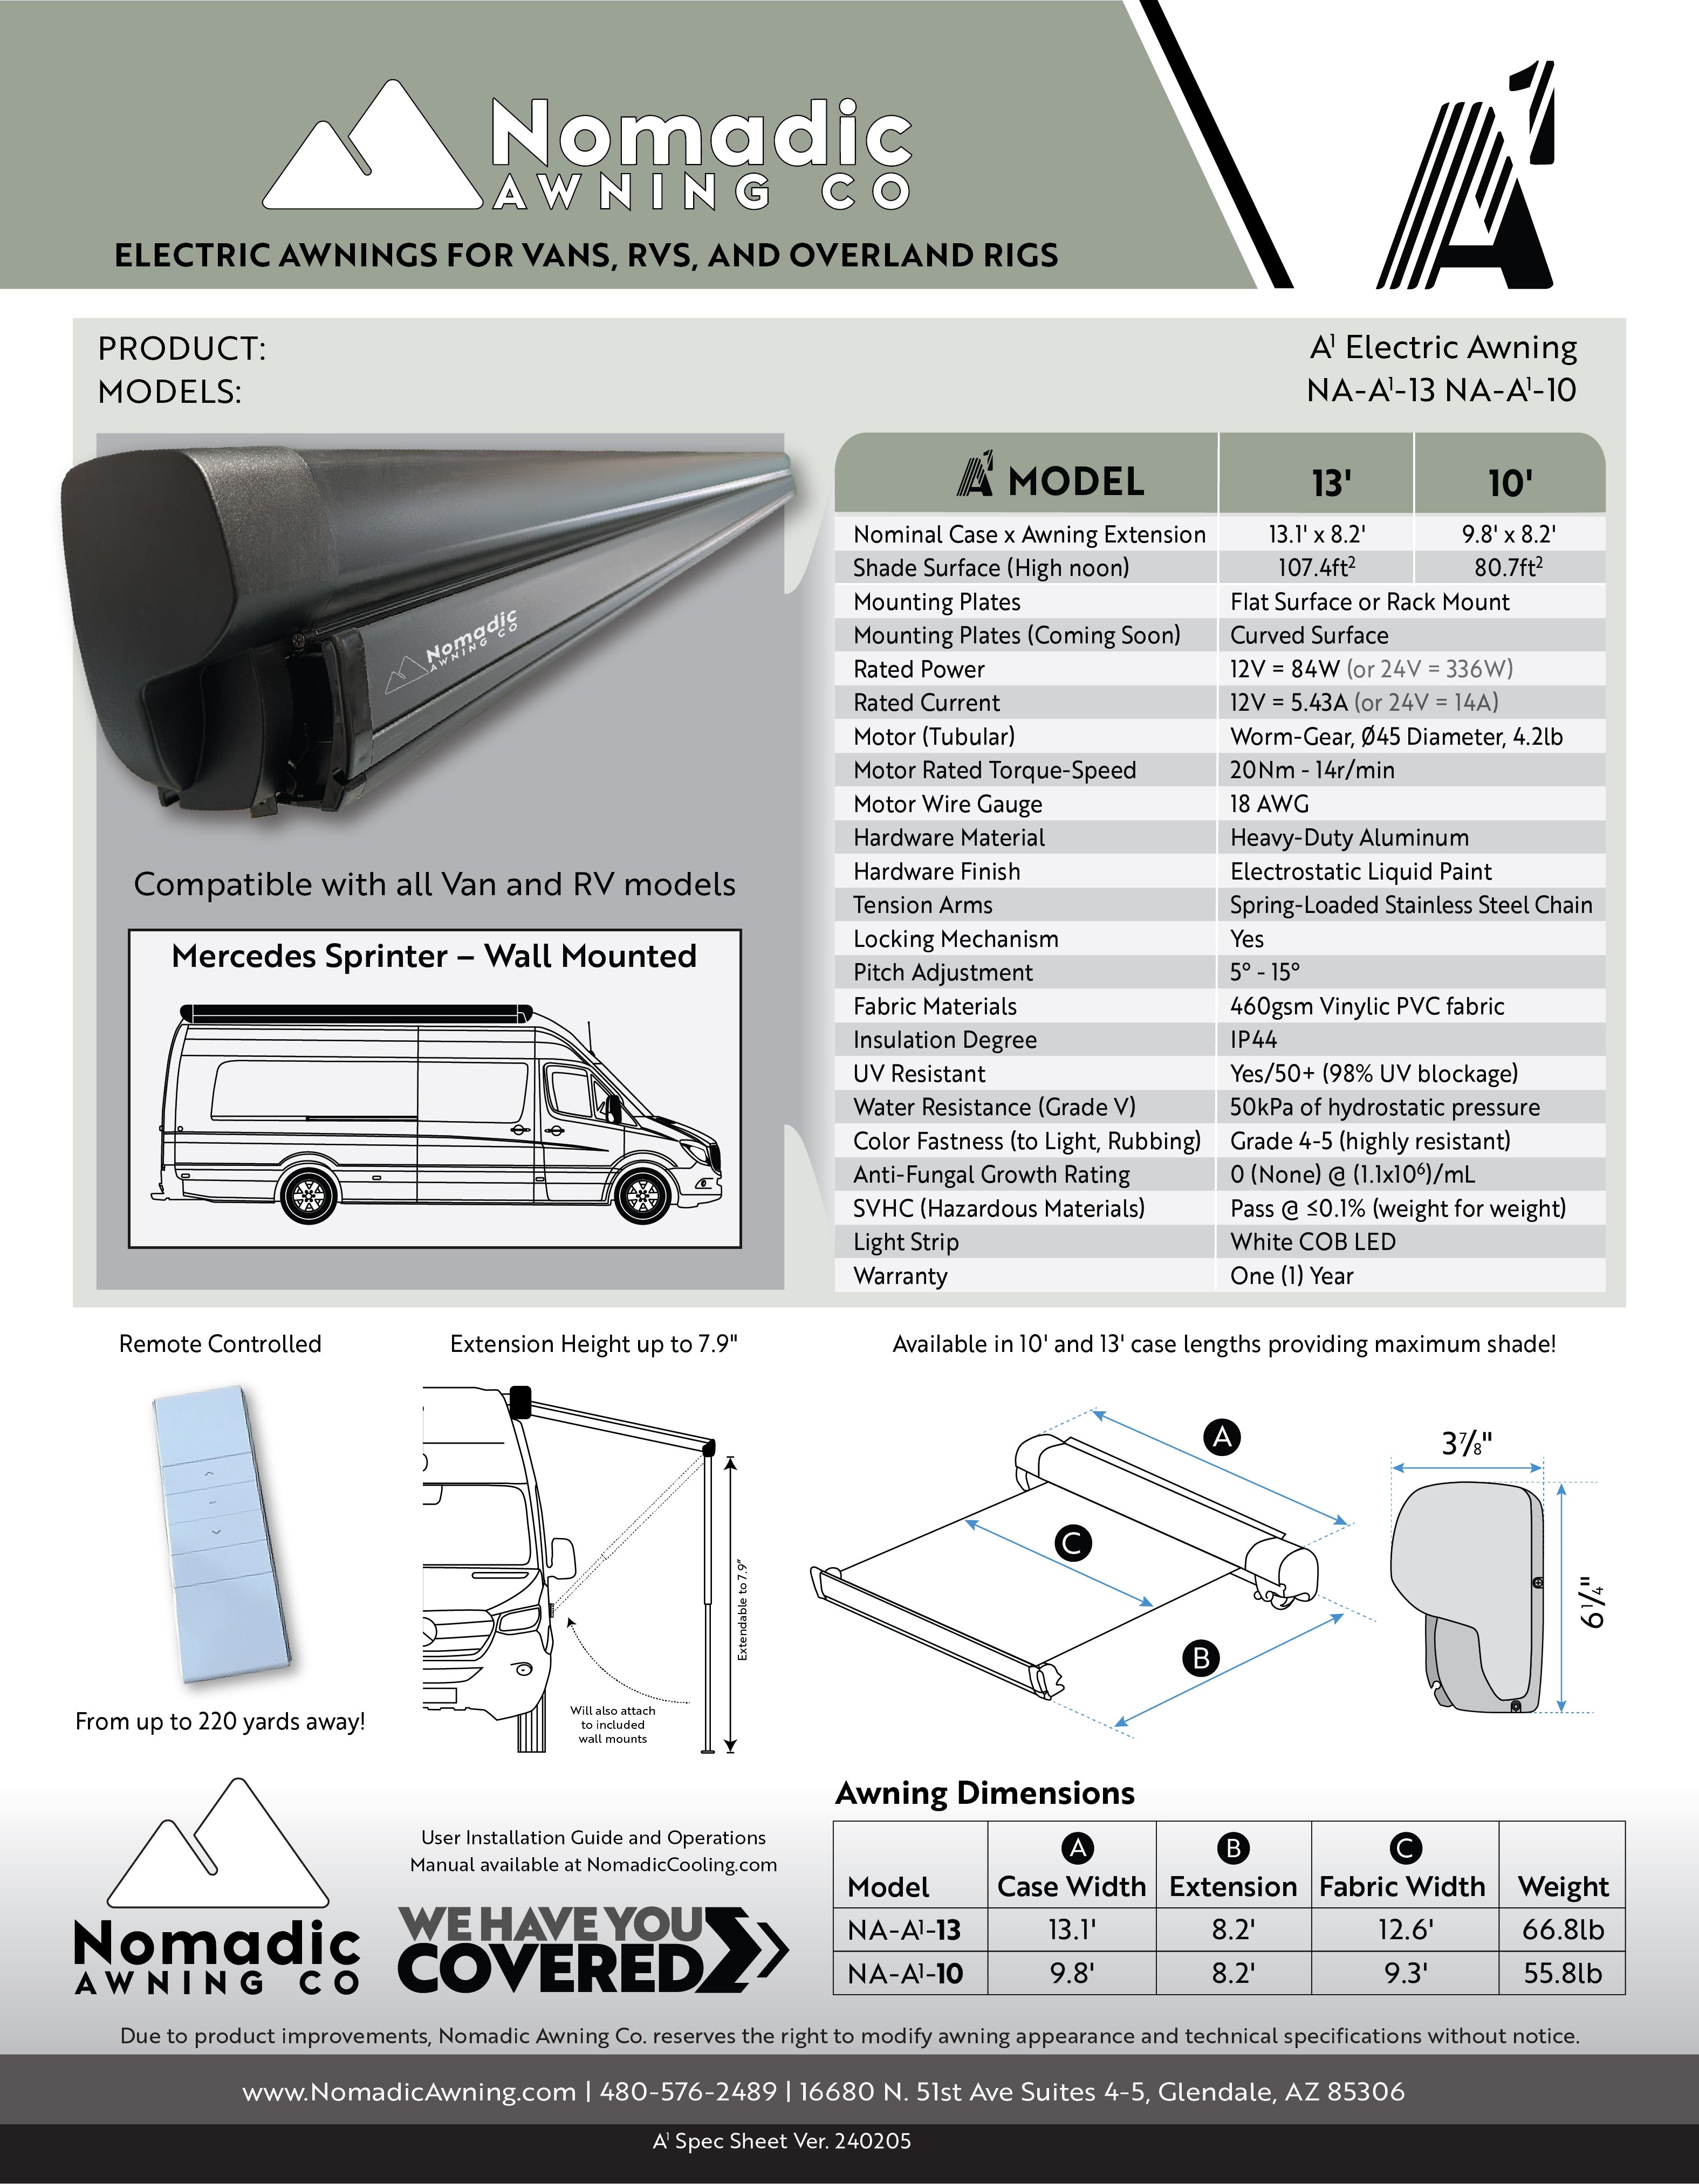 The A1 Electric Awning Spec Sheet - Everything you want to know on one page!